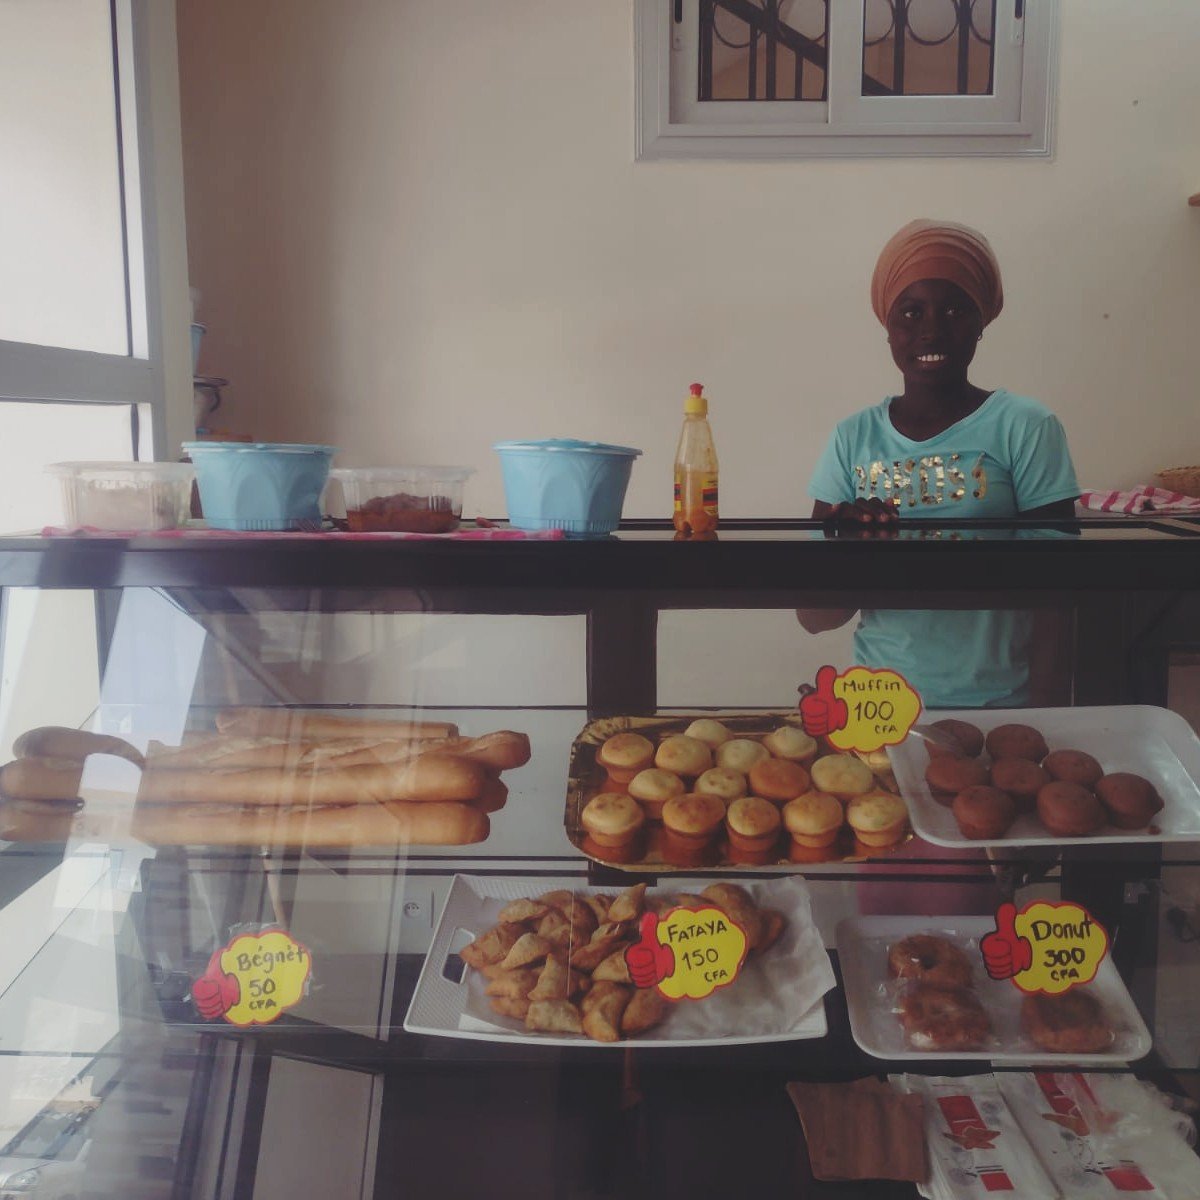 ERS School in Dakar, Senegal recently completed construction of a boutique with the help of Browncroft Church in Rochester, NY.  Vocational students can now sell their handmade items including bread, pastries, jewelry, clothing, hand printed cards an